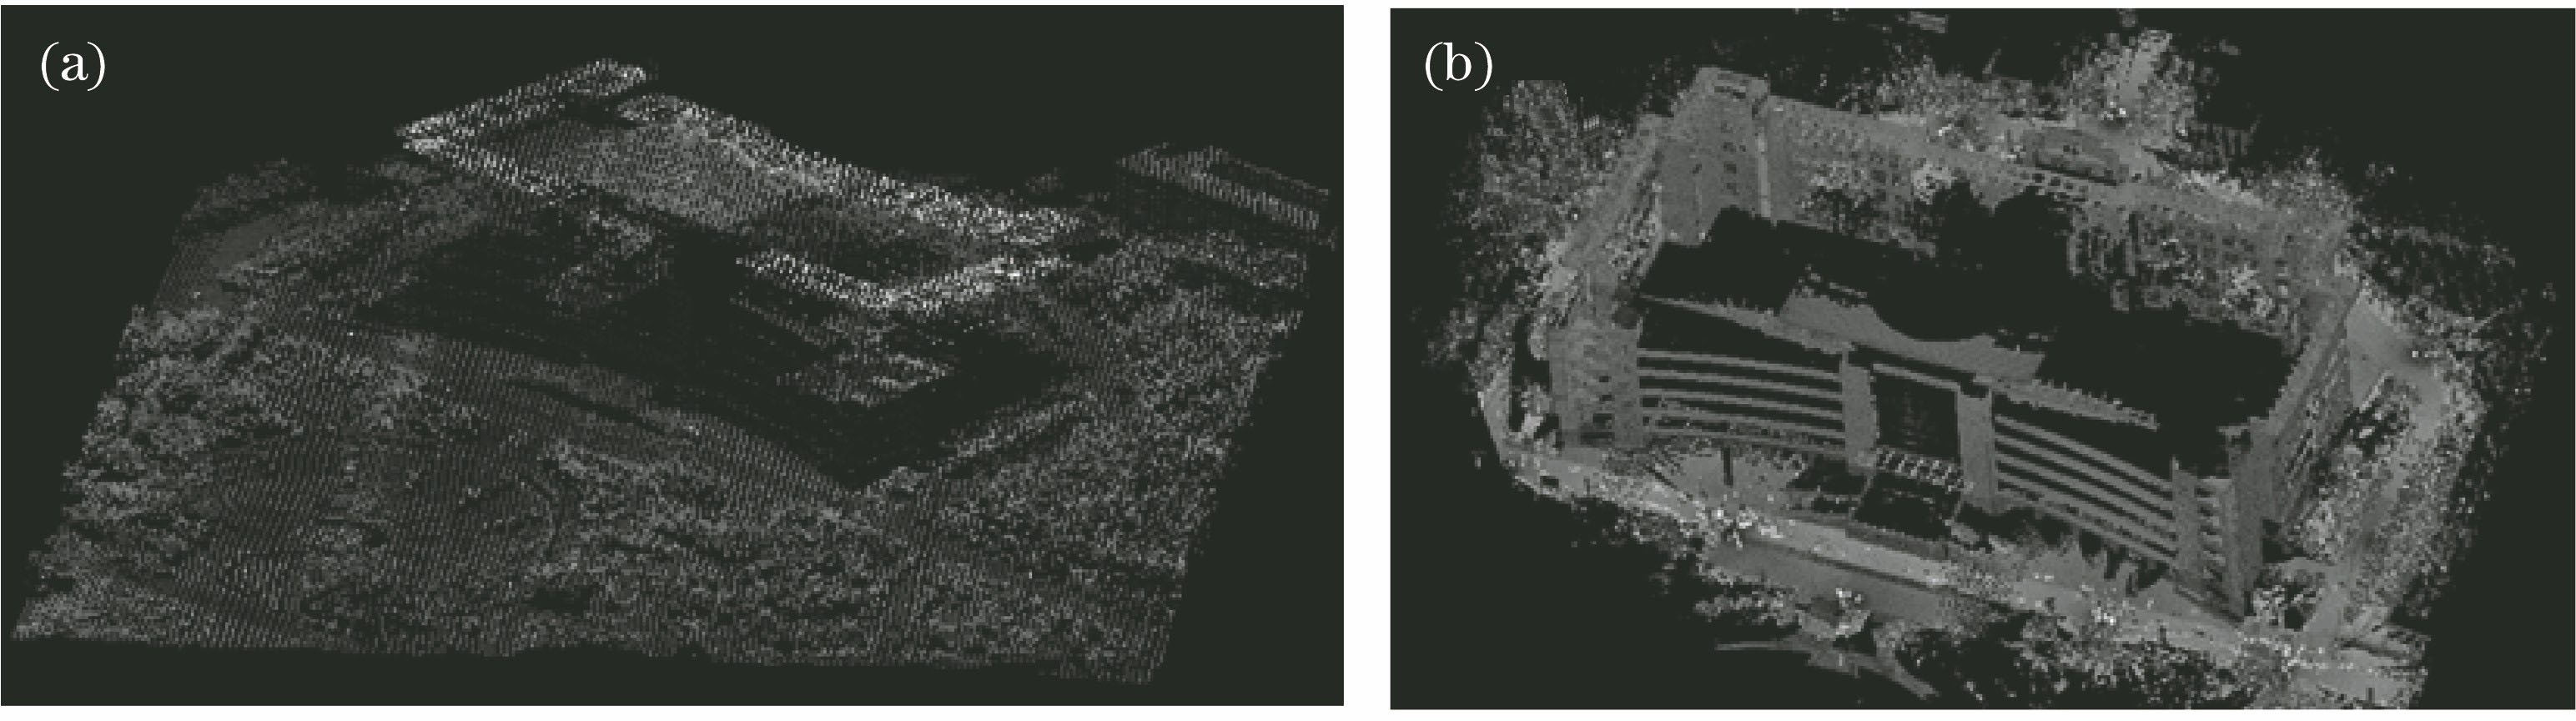 Corrected intensity images of (a) airborne and (b) terrestrial LiDAR